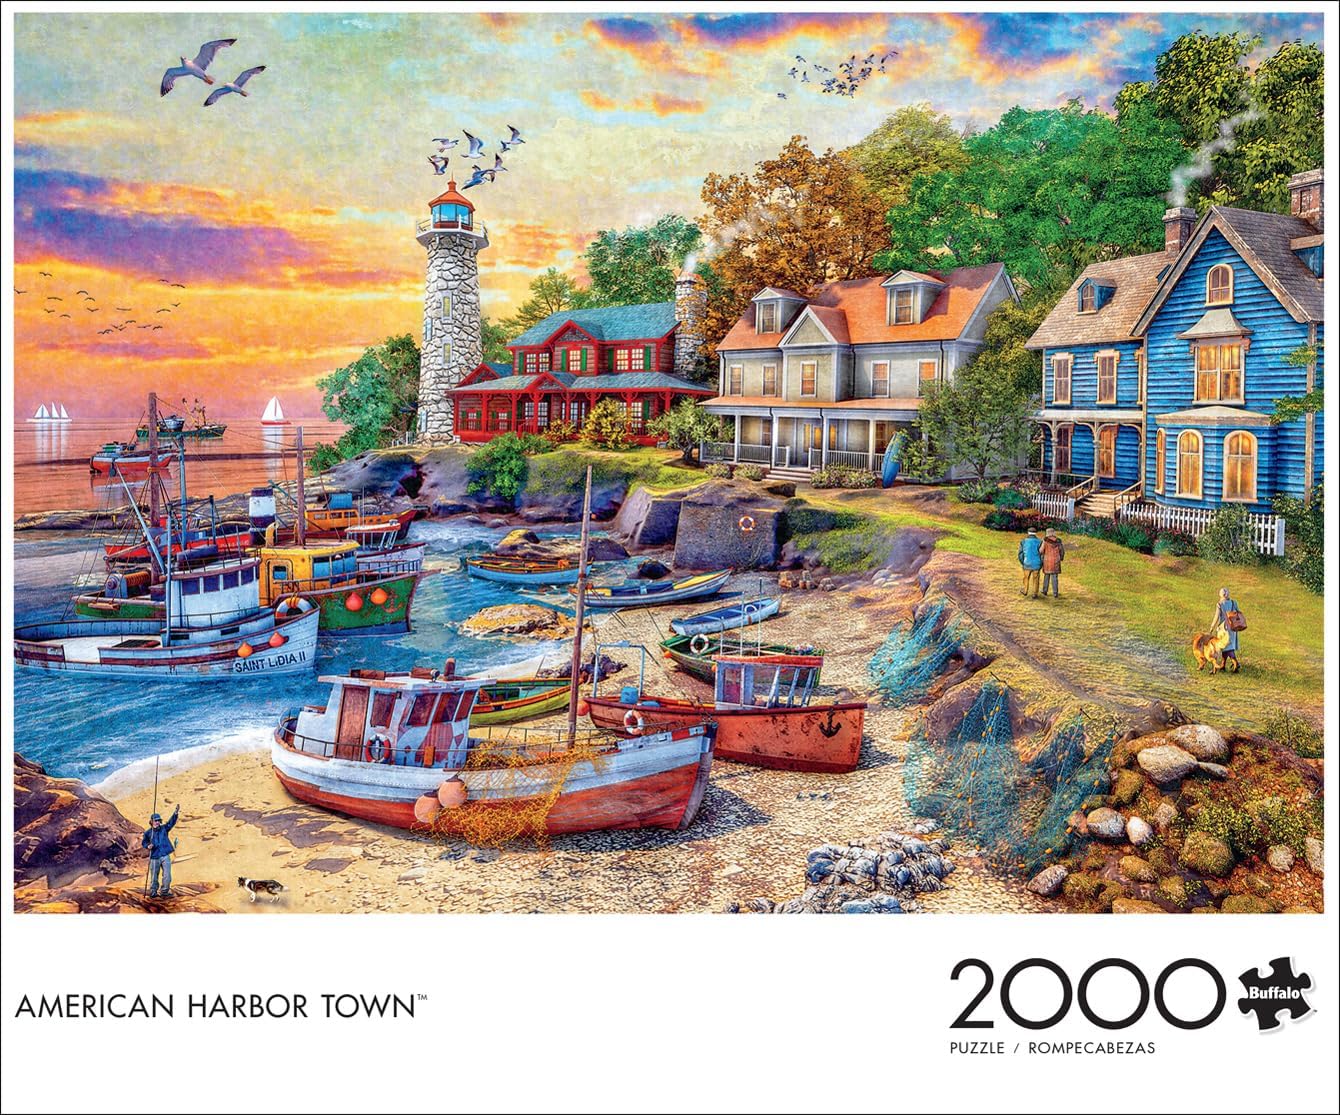 American Harbor Town - 2000 Piece Jigsaw Puzzle